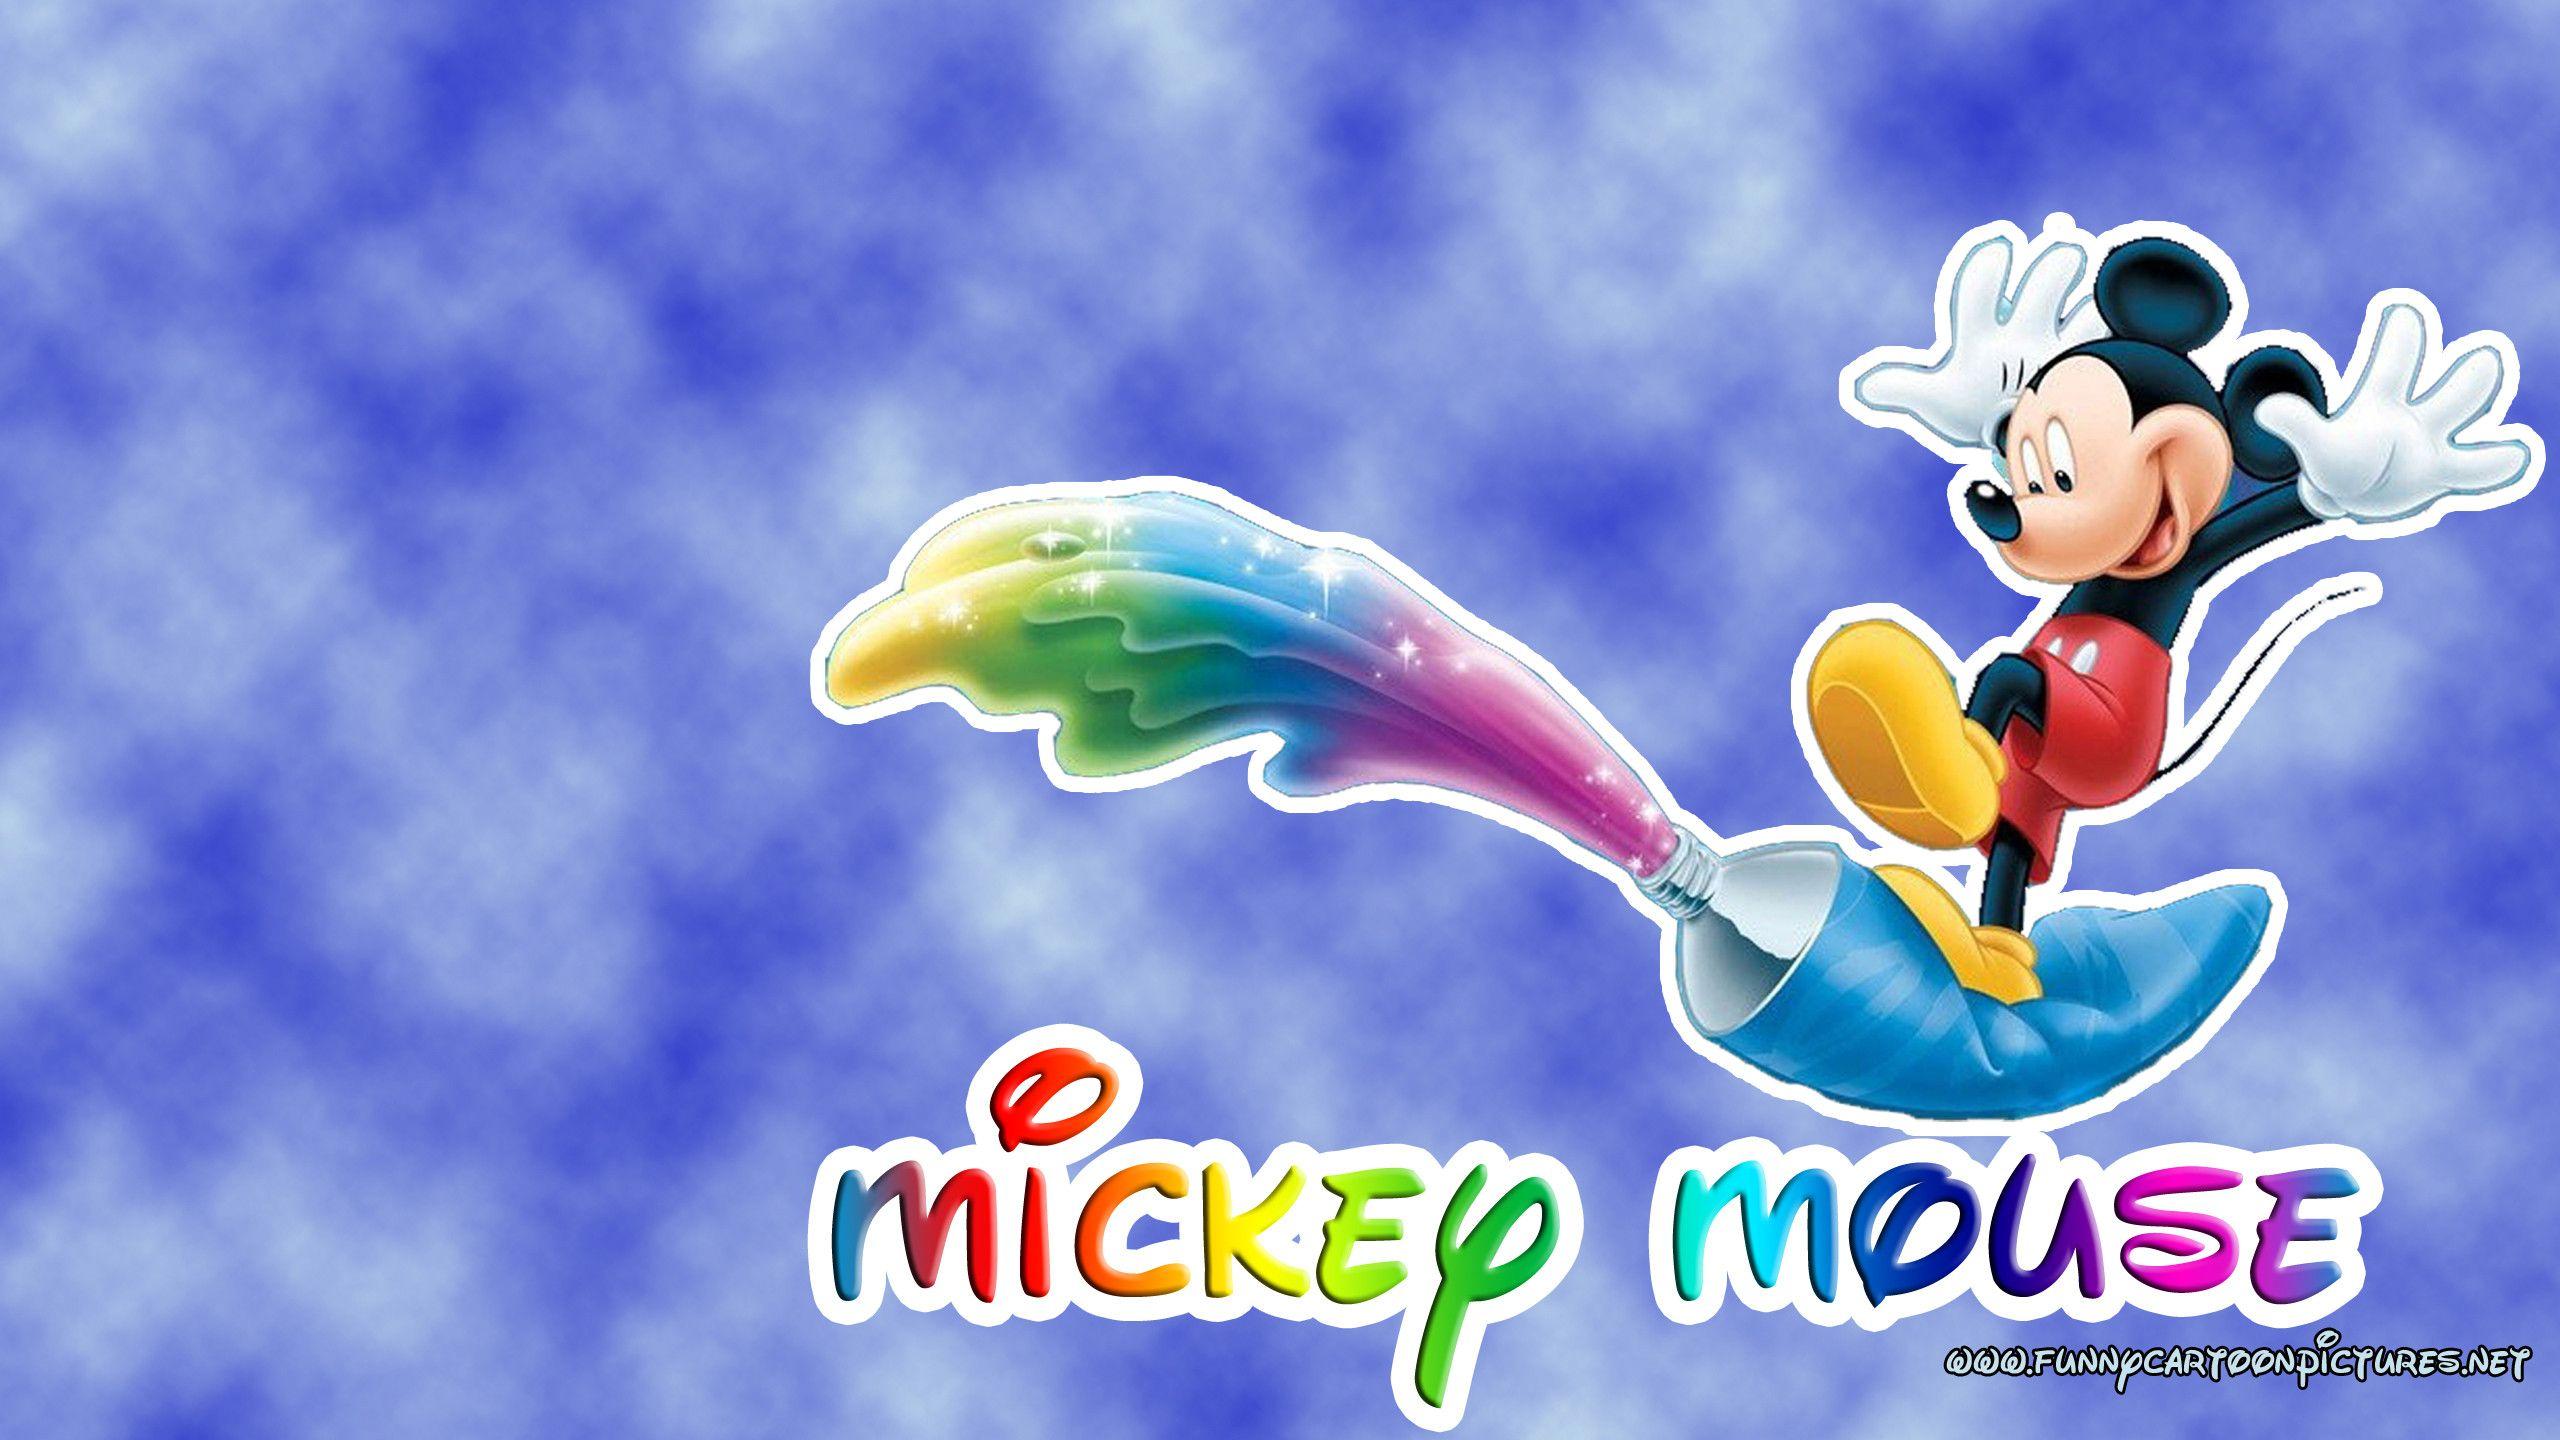 Mickey Mouse wallpaper. Mickey Mouse background